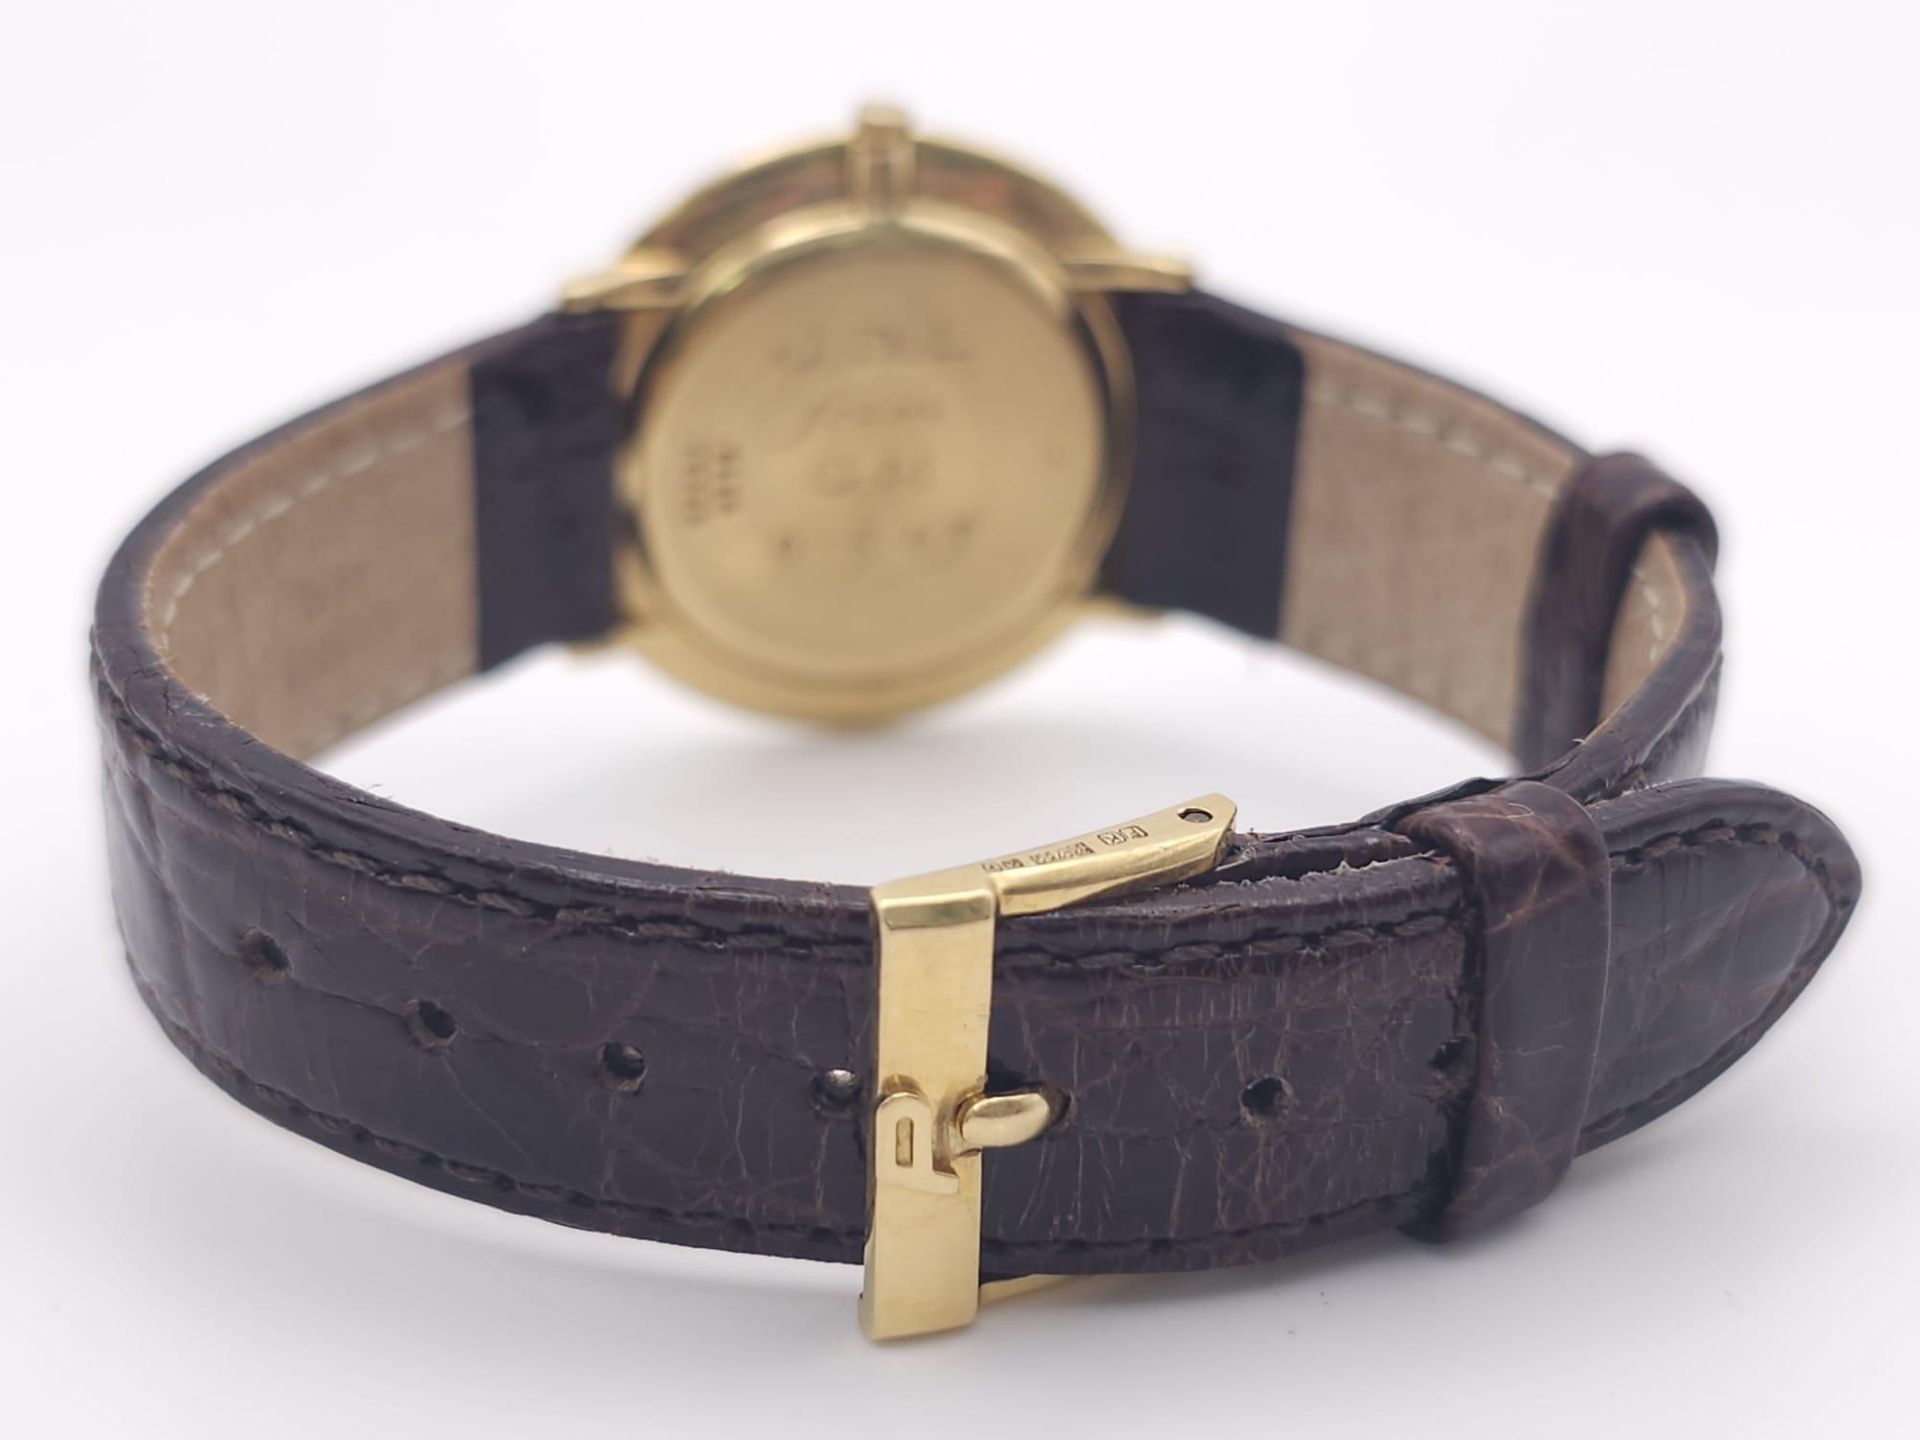 A Vintage 18K Gold Piaget Gents Watch with Hypnotic Dial. Brown crocodile strap. 18k gold case - - Image 11 of 25